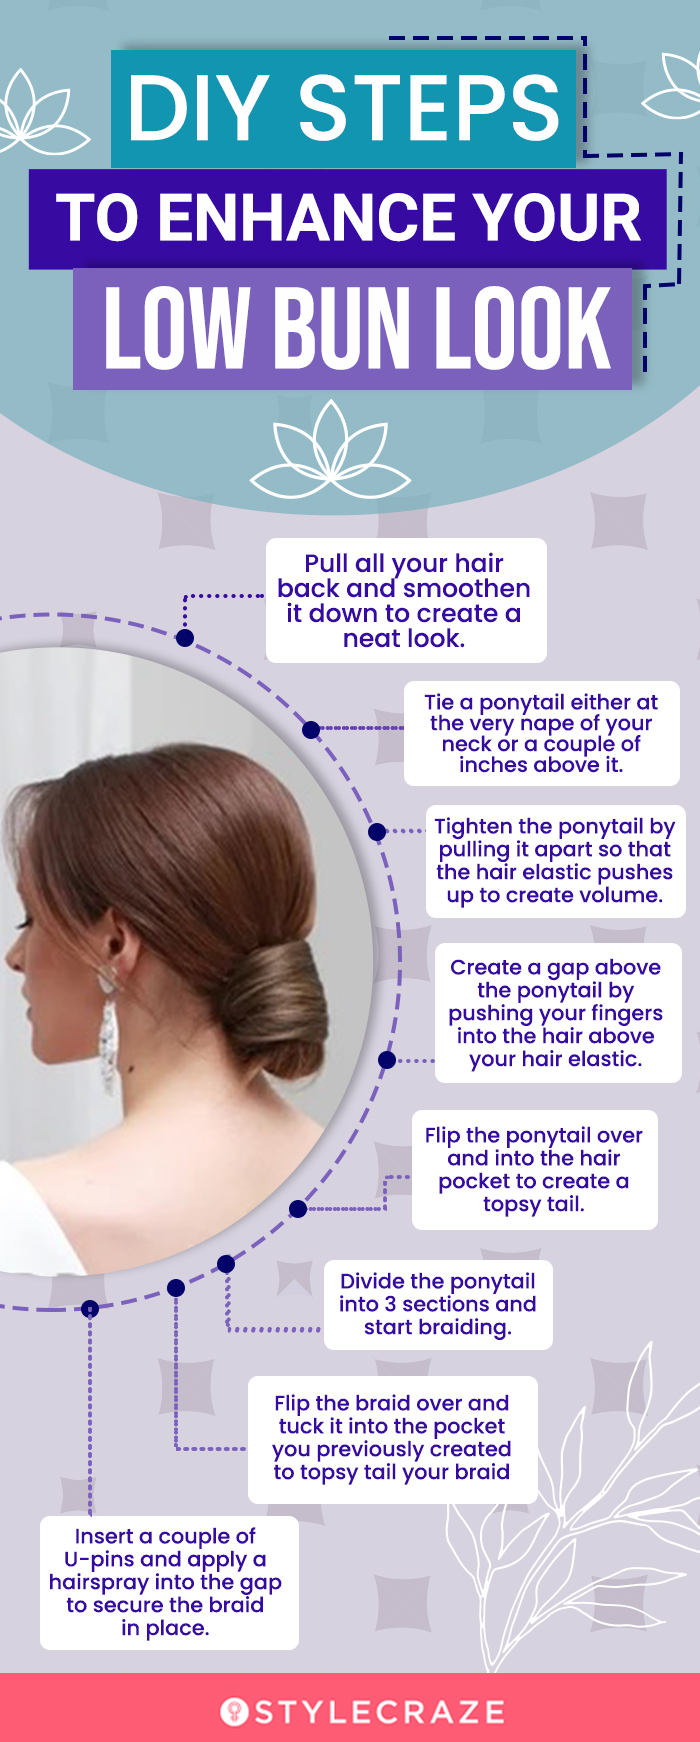 diy steps to enchance your low ben look [infographic]